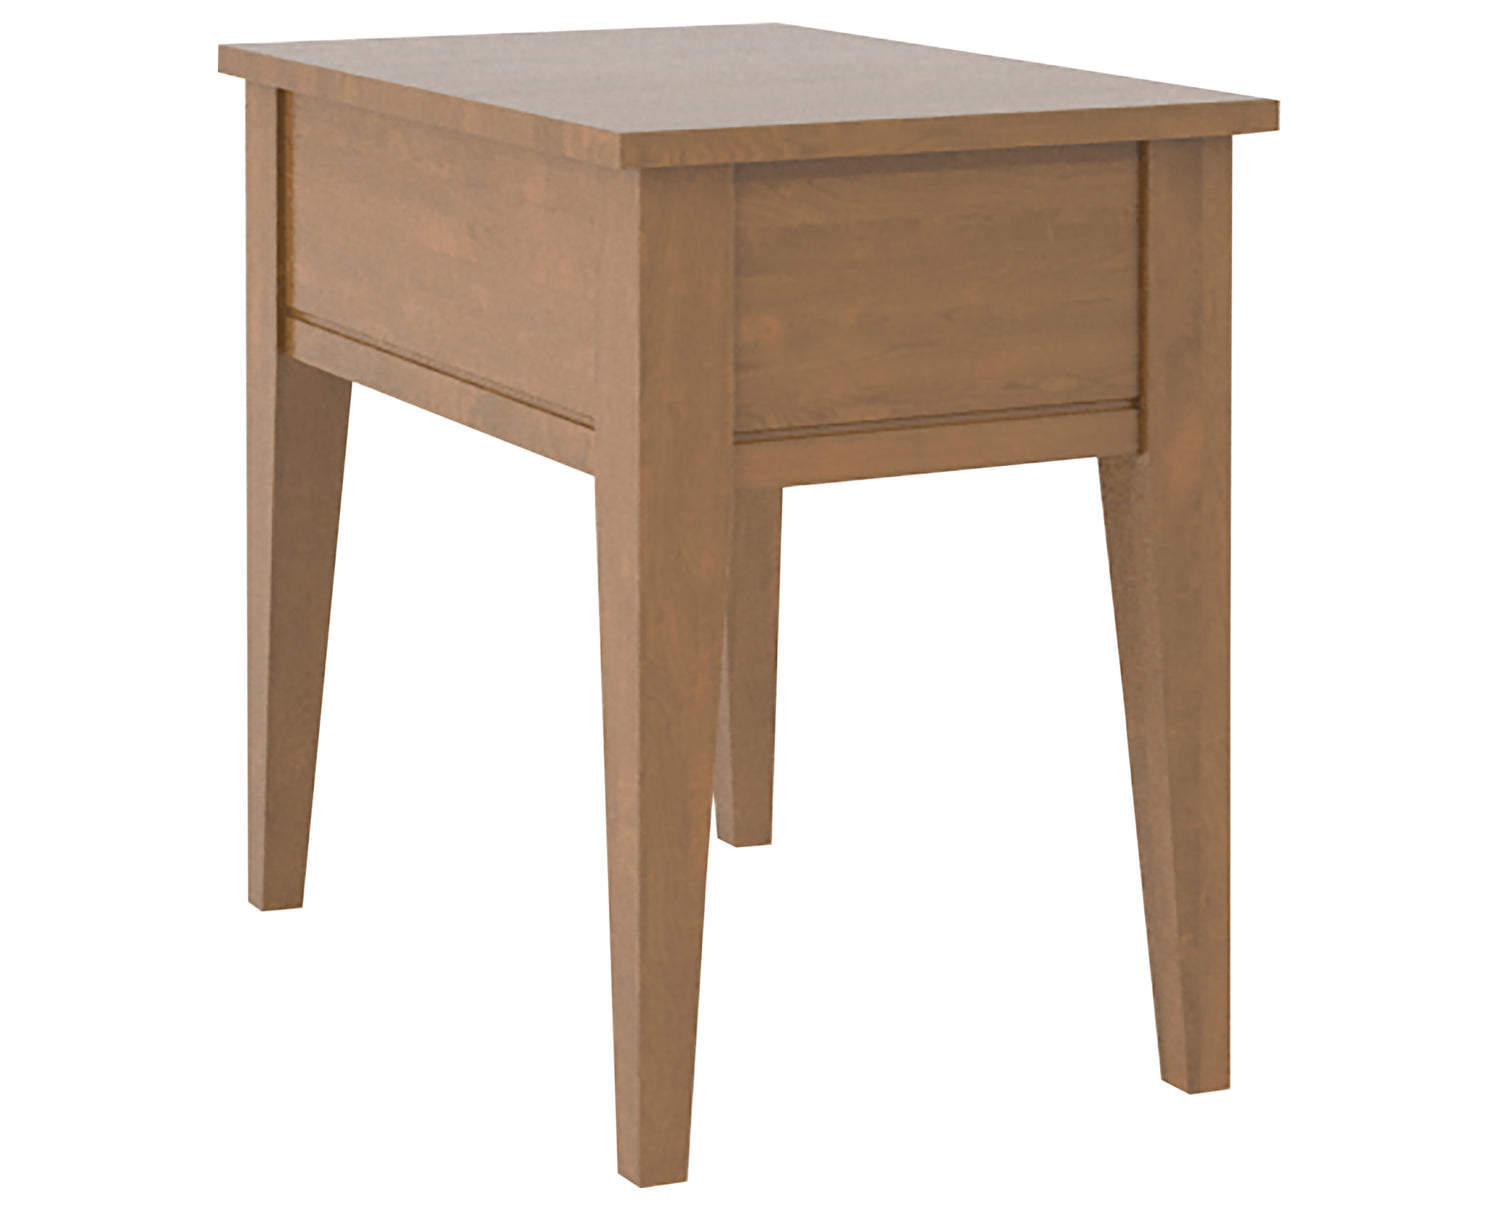 Oak Washed | Canadel Living End Table 2416 - PG Legs | Valley Ridge Furniture